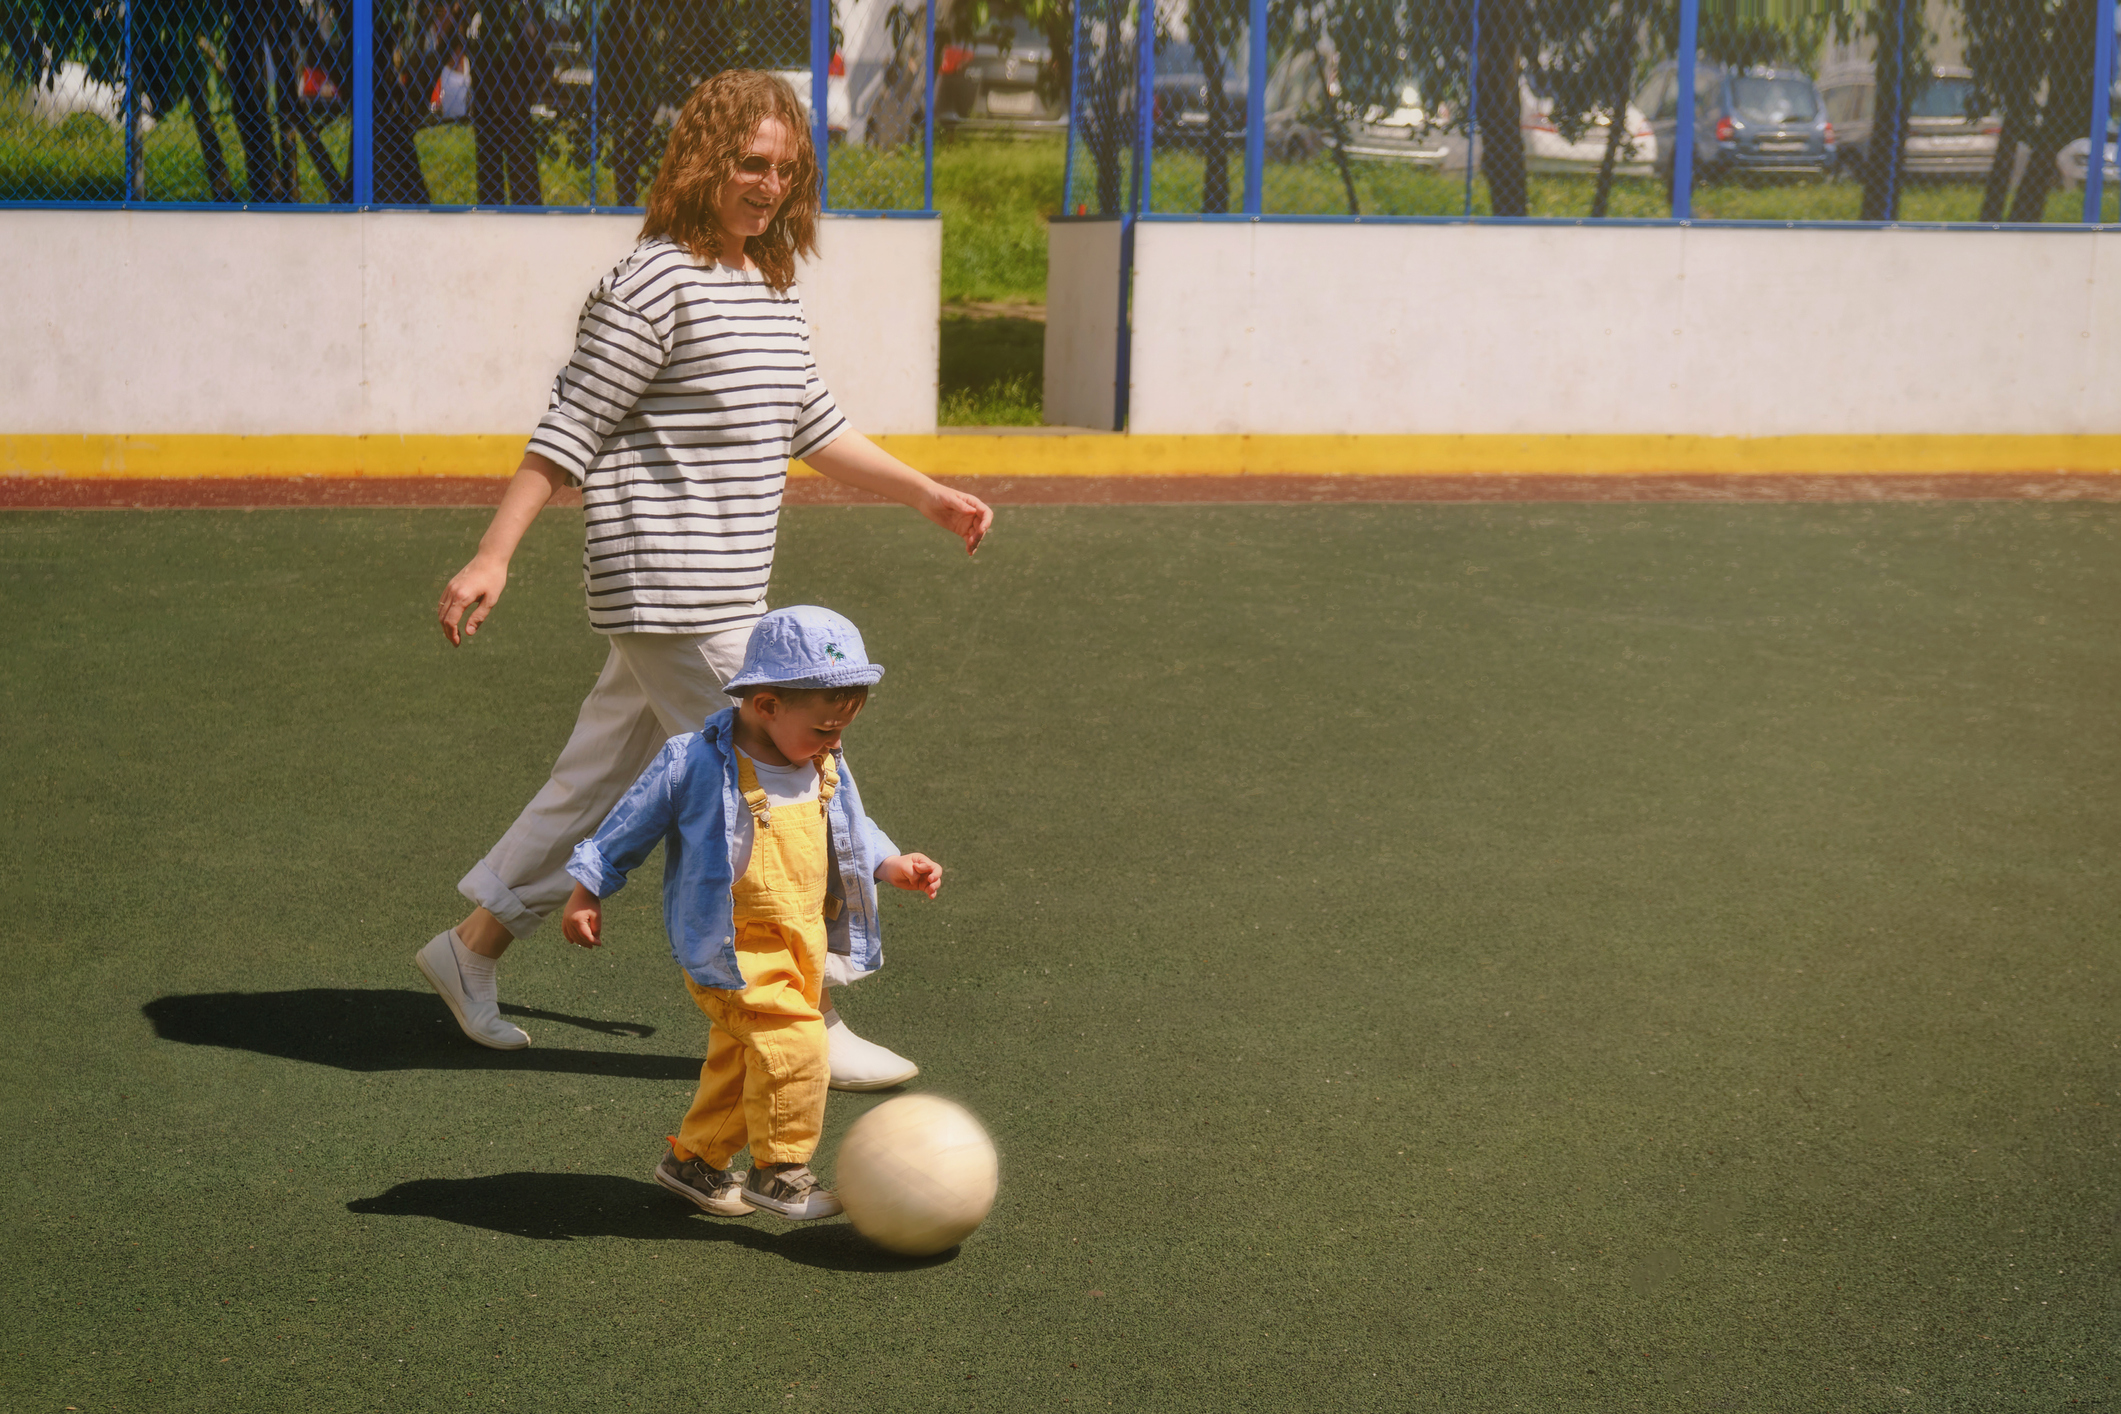 The child and woman mother is having fun kicking the soccer ball around on the outdoor field. Baby with mom is happily playing with the white ball in the park. Kid aged about two years.